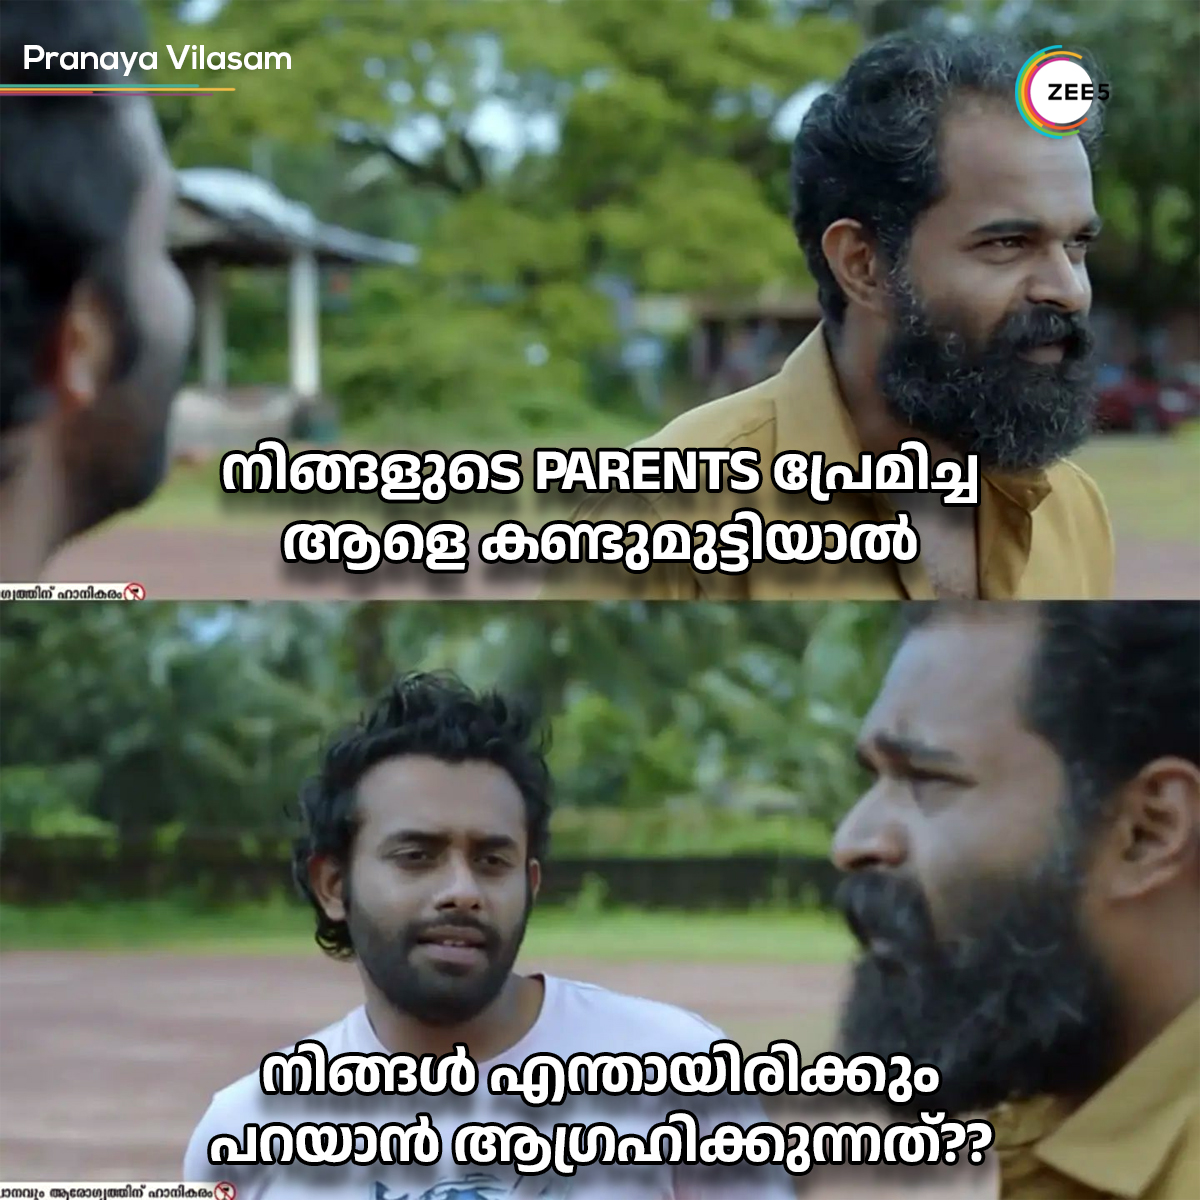 What would you like to say if you meet your PARENTS loved guy ??   Comment now ☺️

#Pranayavilasam 
#MalayalamCinema #Malayalam #WatchOnZEE5 #ZEE5Keralam #ZEE5